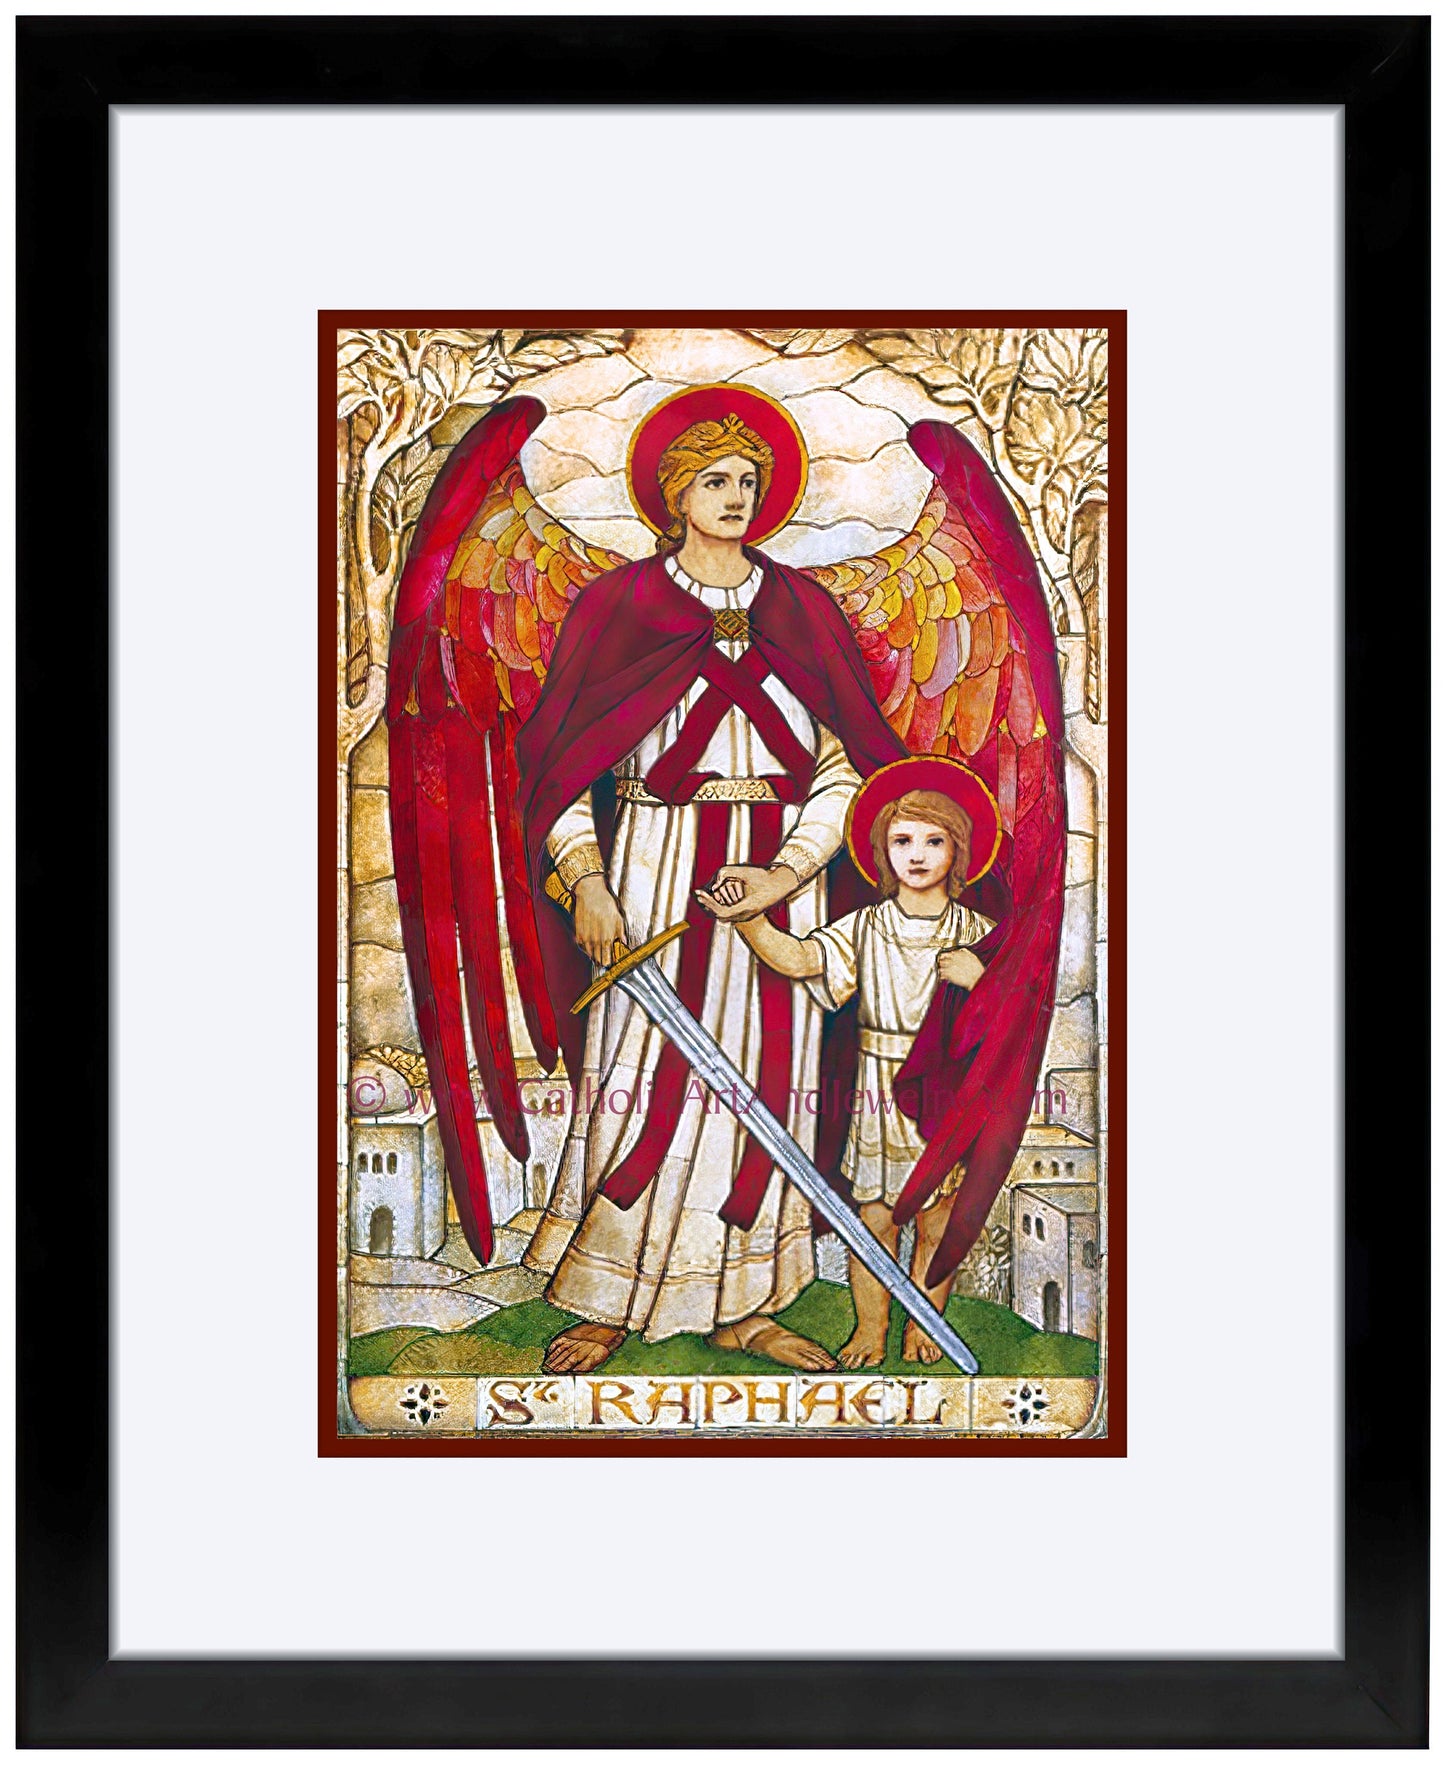 Archangel Raphael – from a Vintage Stained Glass Window – Art Nouveau – Catholic Art Print – Archival – Catholic Gift– Guardian Angel